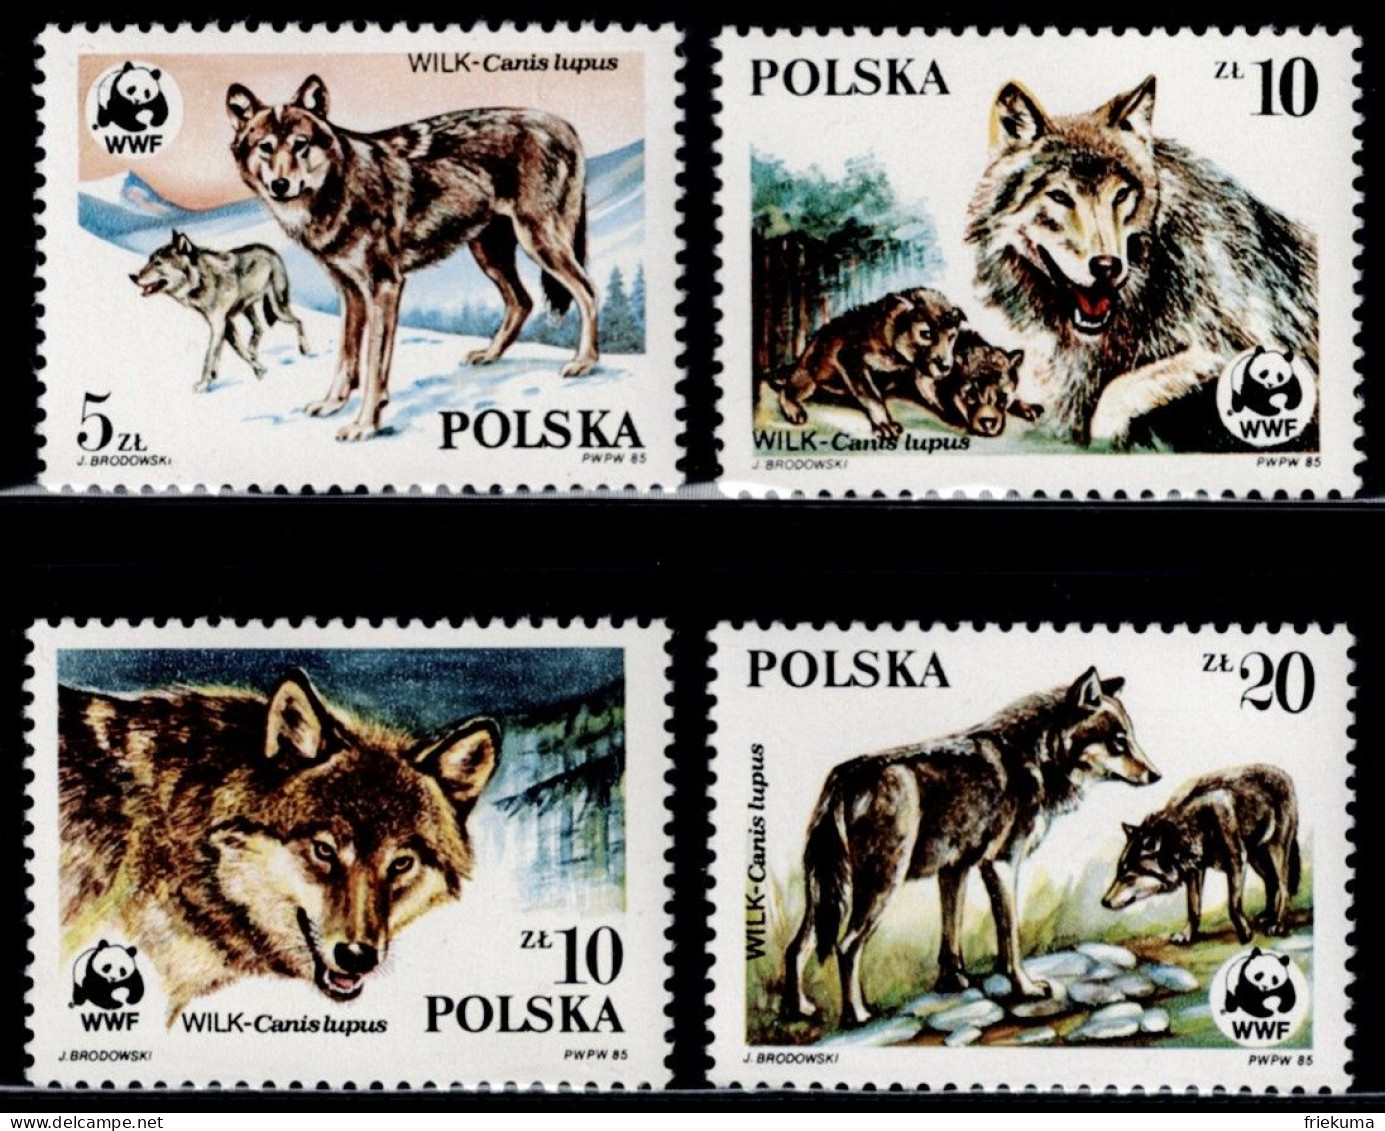 Polska 1985, Wolf: Wolves In Winter And Summer, She-wolf With Pups, Wolf (Canis Lupus), MiNr. 2975-2978 - Cani